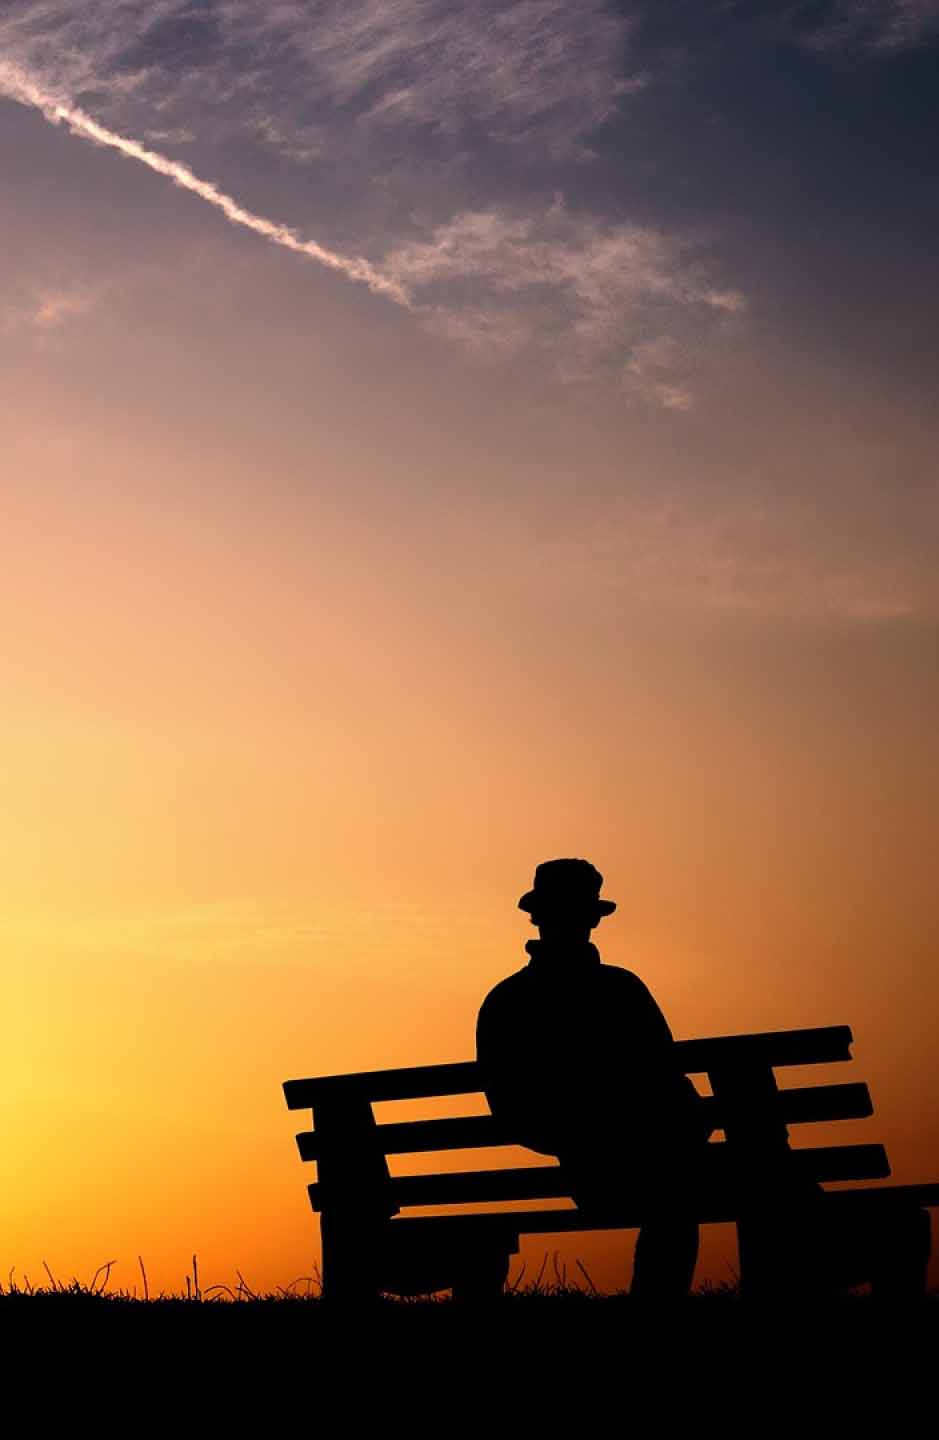 amazing hd wallpapers for mobile,sky,sunset,sitting,silhouette,horizon